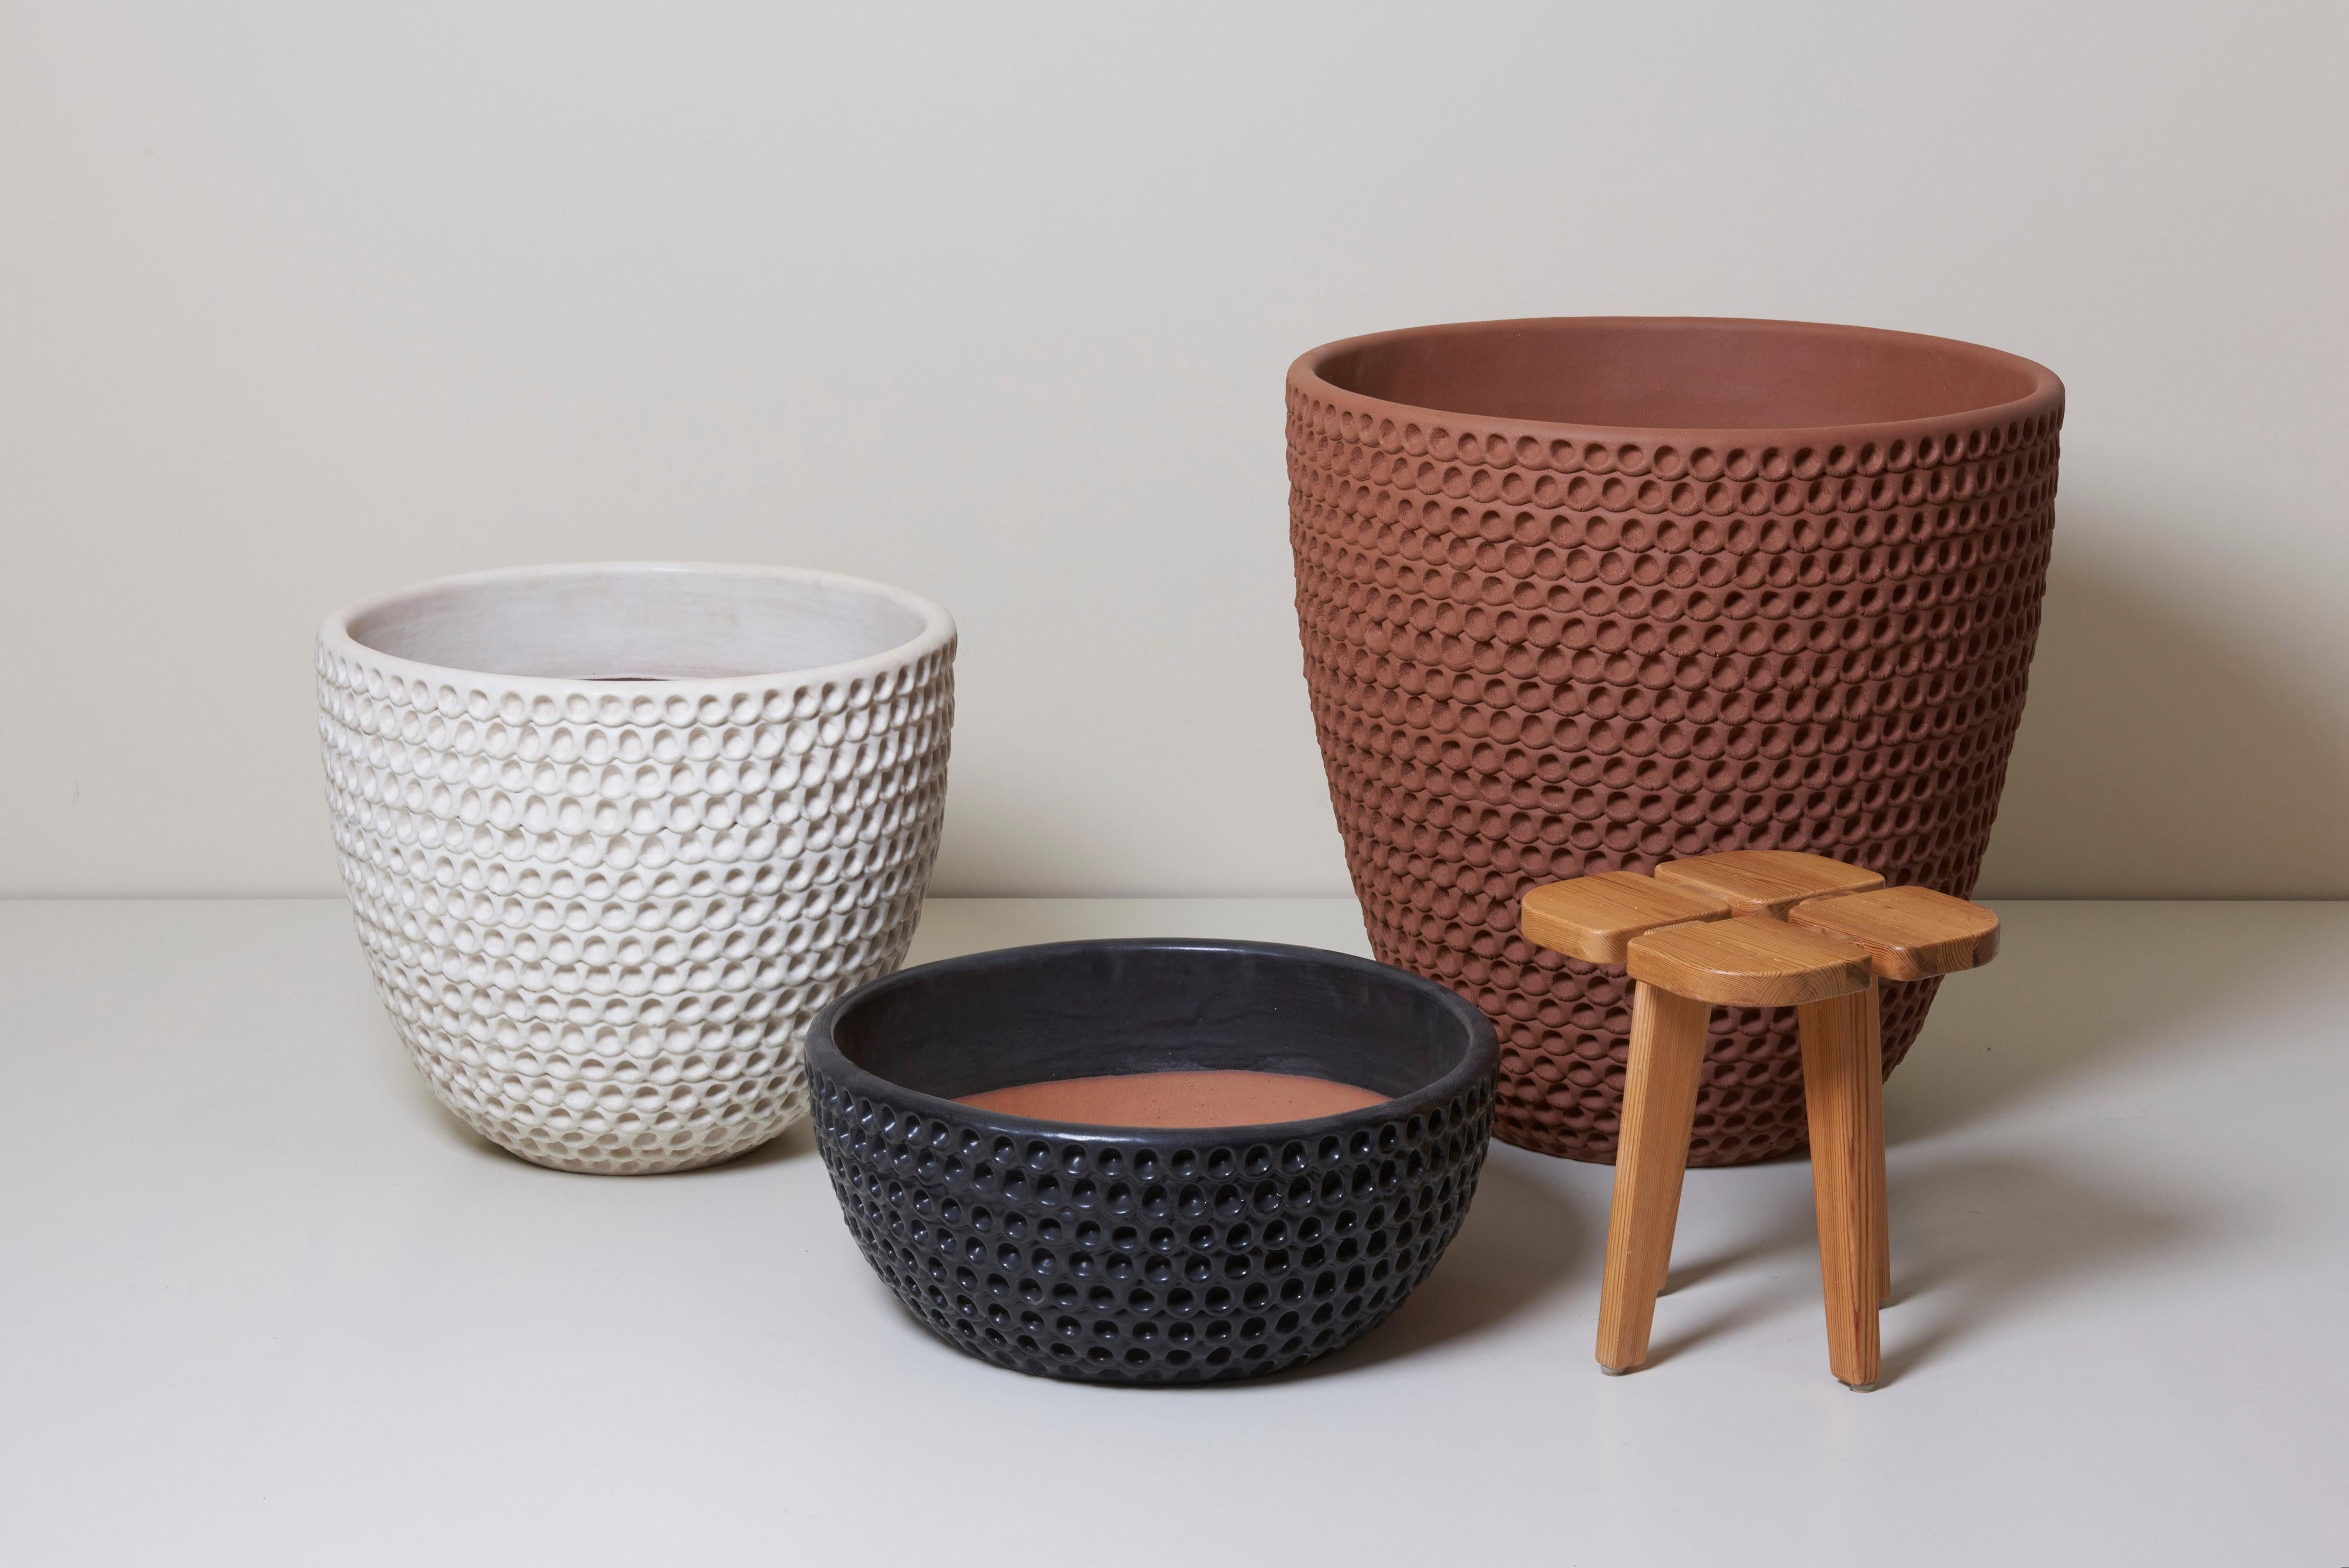 Set of a large brown, a medium white and a small black thumbpot by Fresno, California Artist Stan Bitters. The planters are hand-built with thumbprint design. The hand-built, organic, earthy pots exist comfortable in a garden area. The pots are made